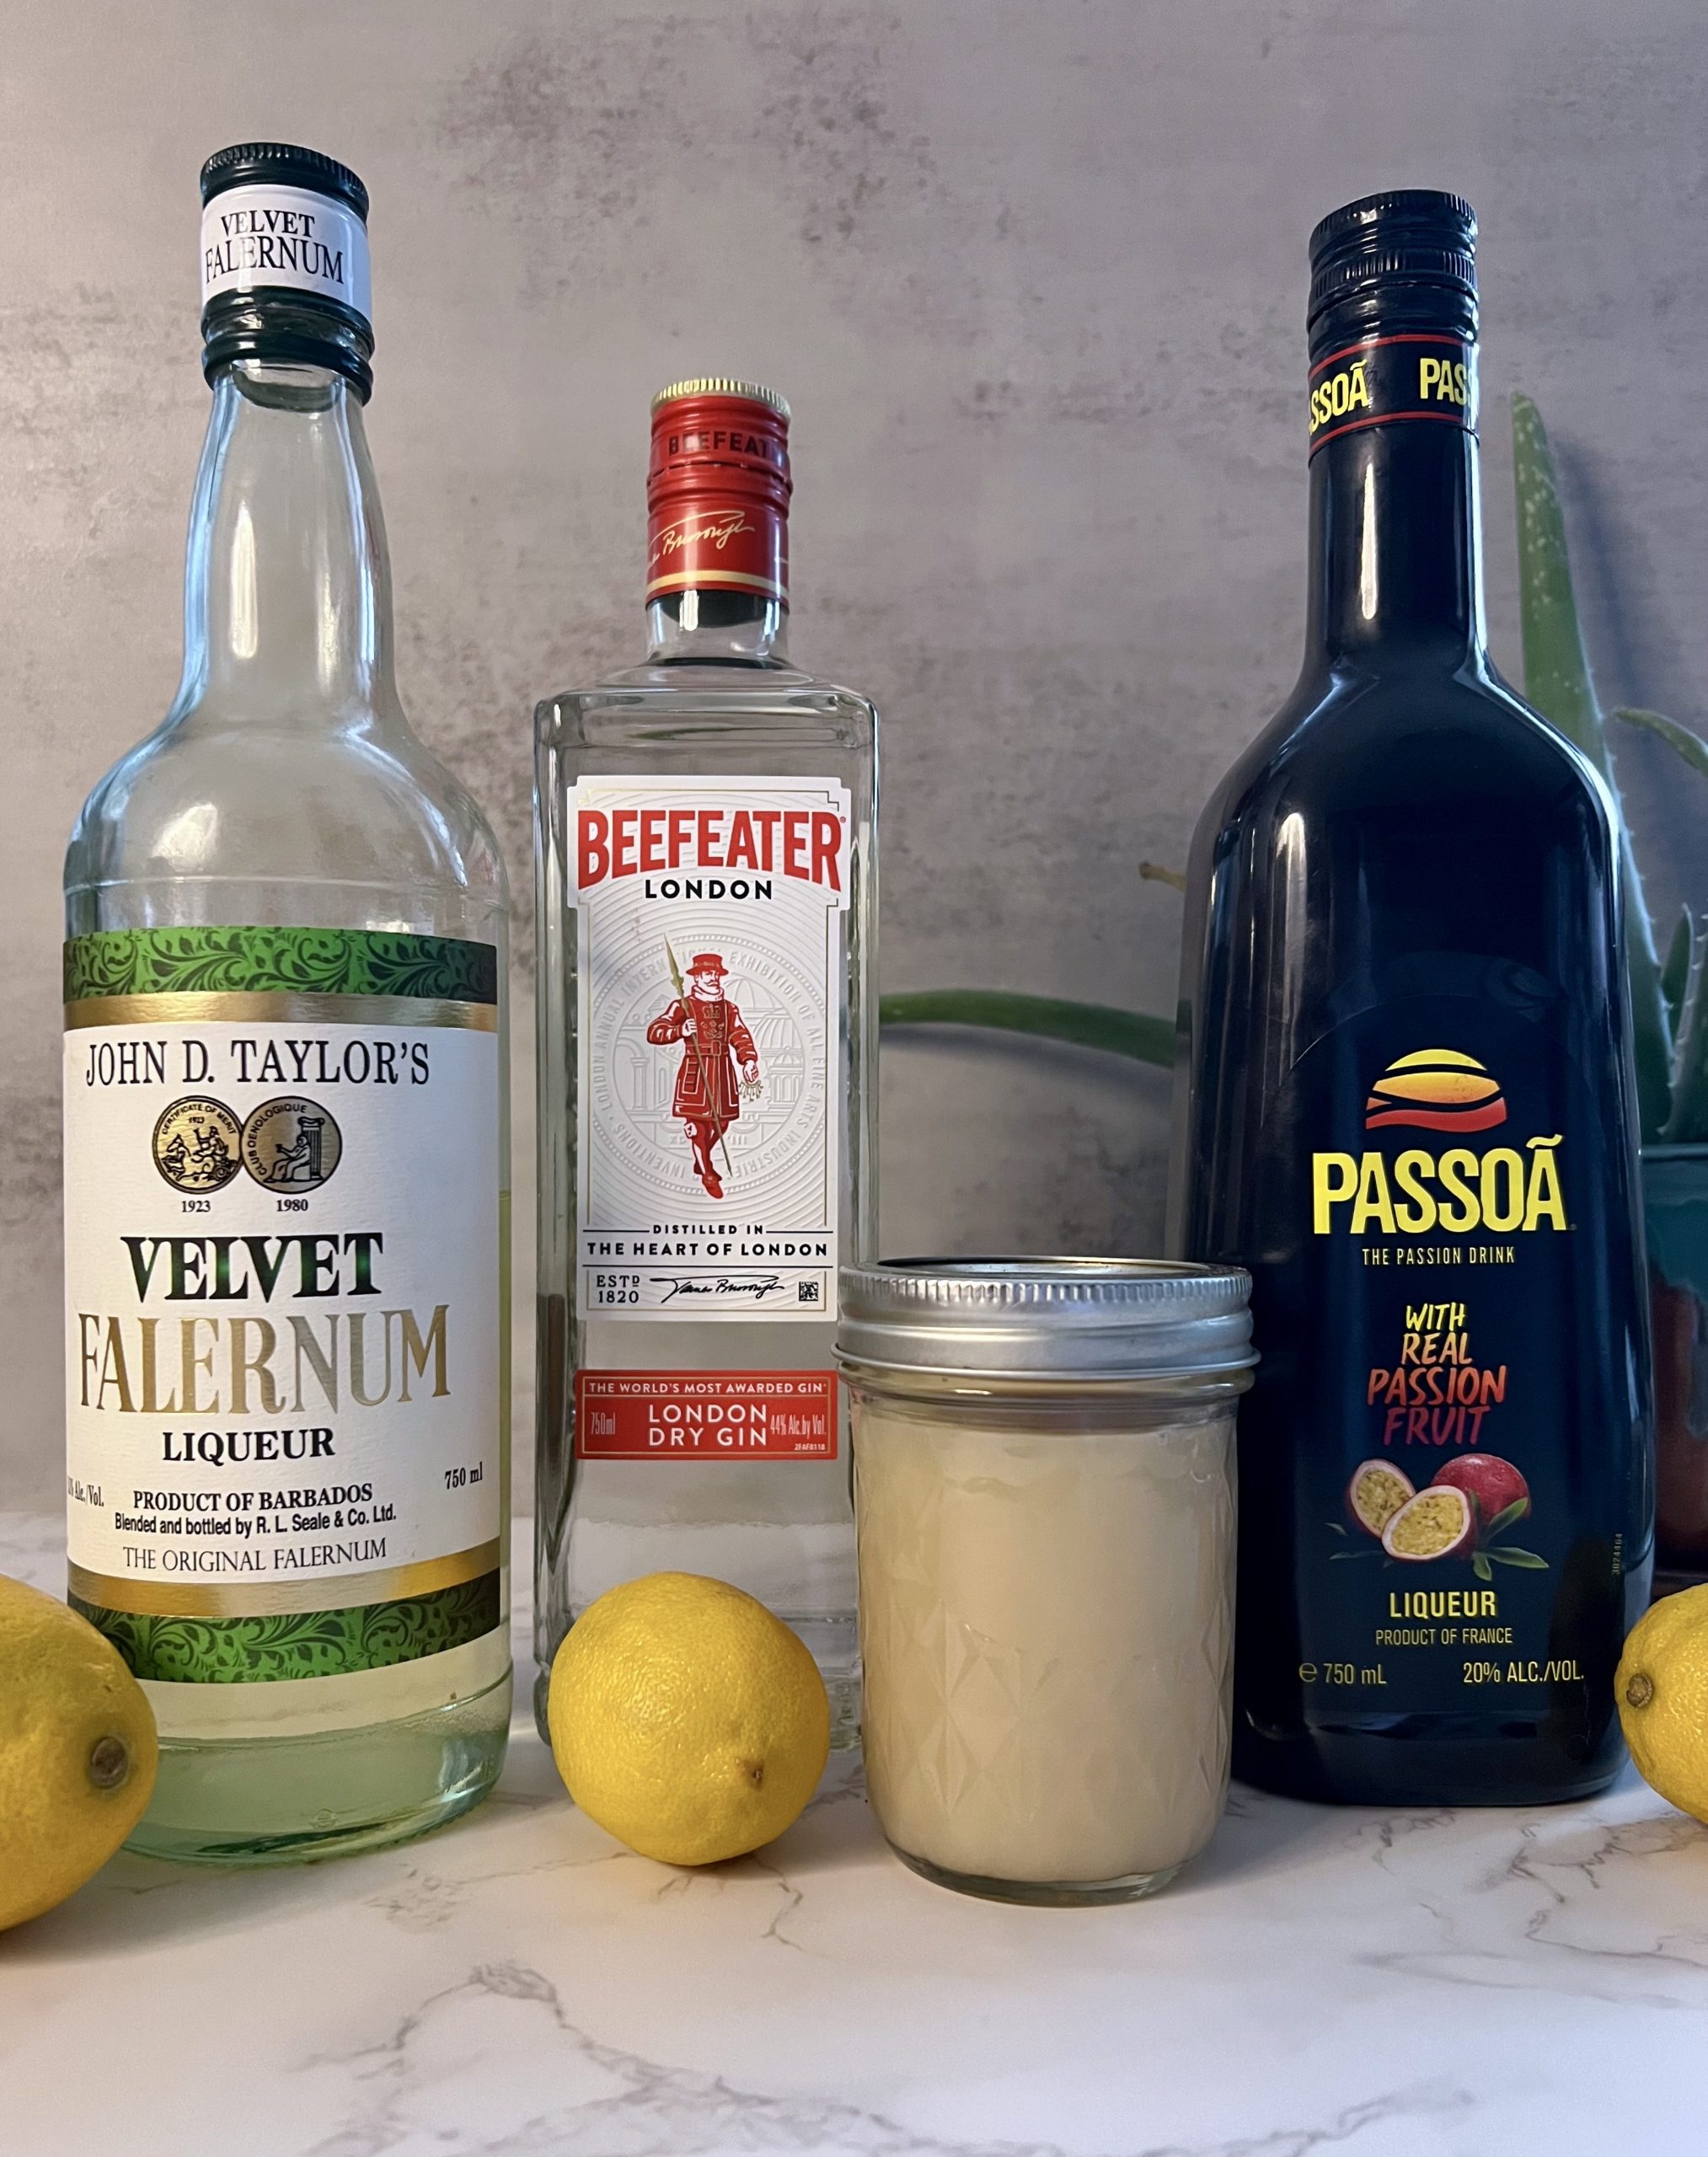 The ingredients of the Saturn cocktail, including Velvet Falernum, Beefeater Gin, orgeat syrup, Passoa Passion Fruit Liqueur, and lemons, lined up on a countertop.